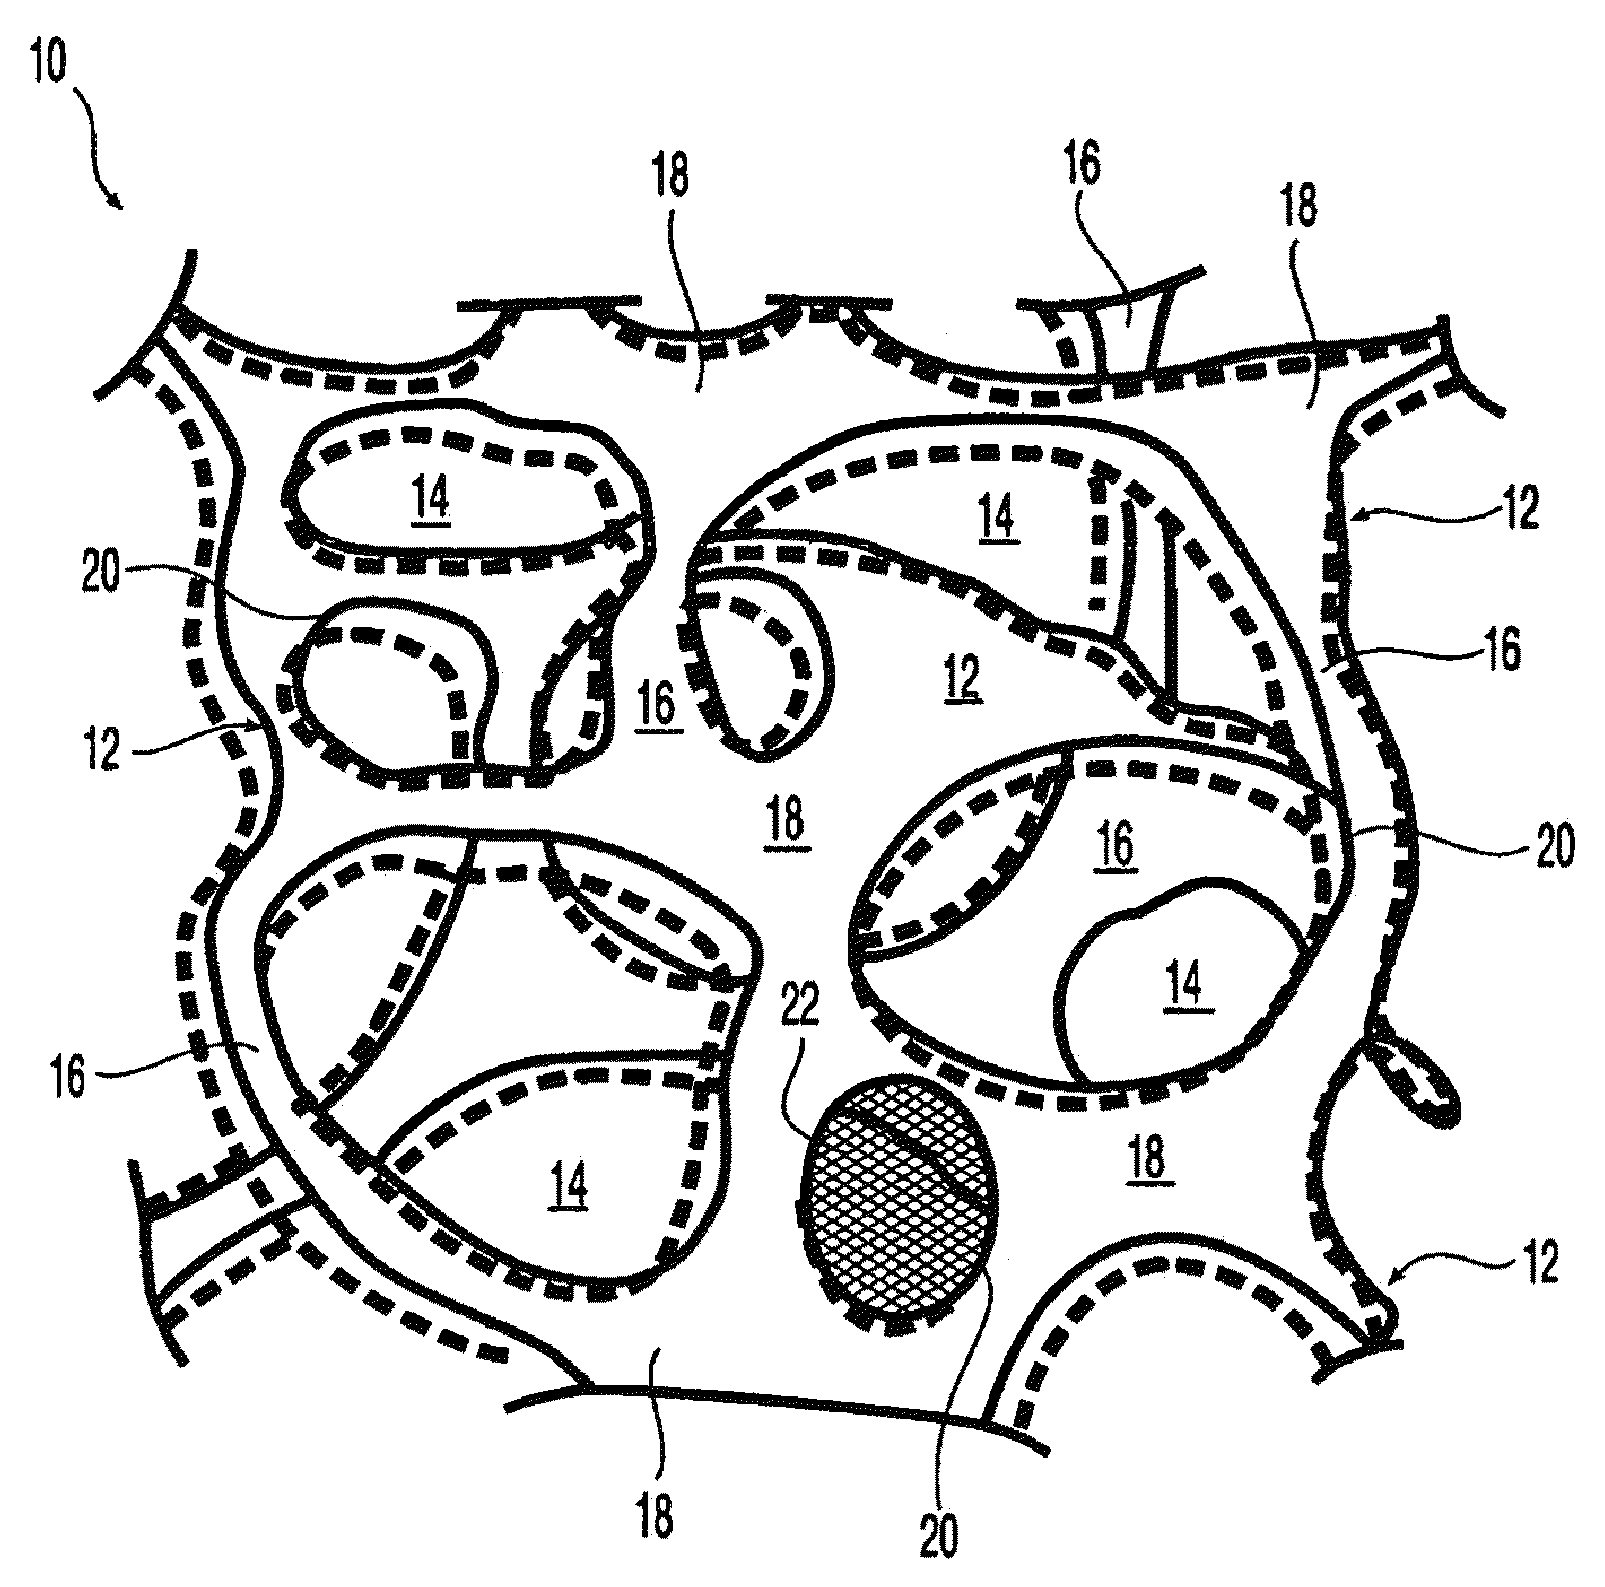 At least partially resorbable reticulated elastomeric matrix elements and methods of making same